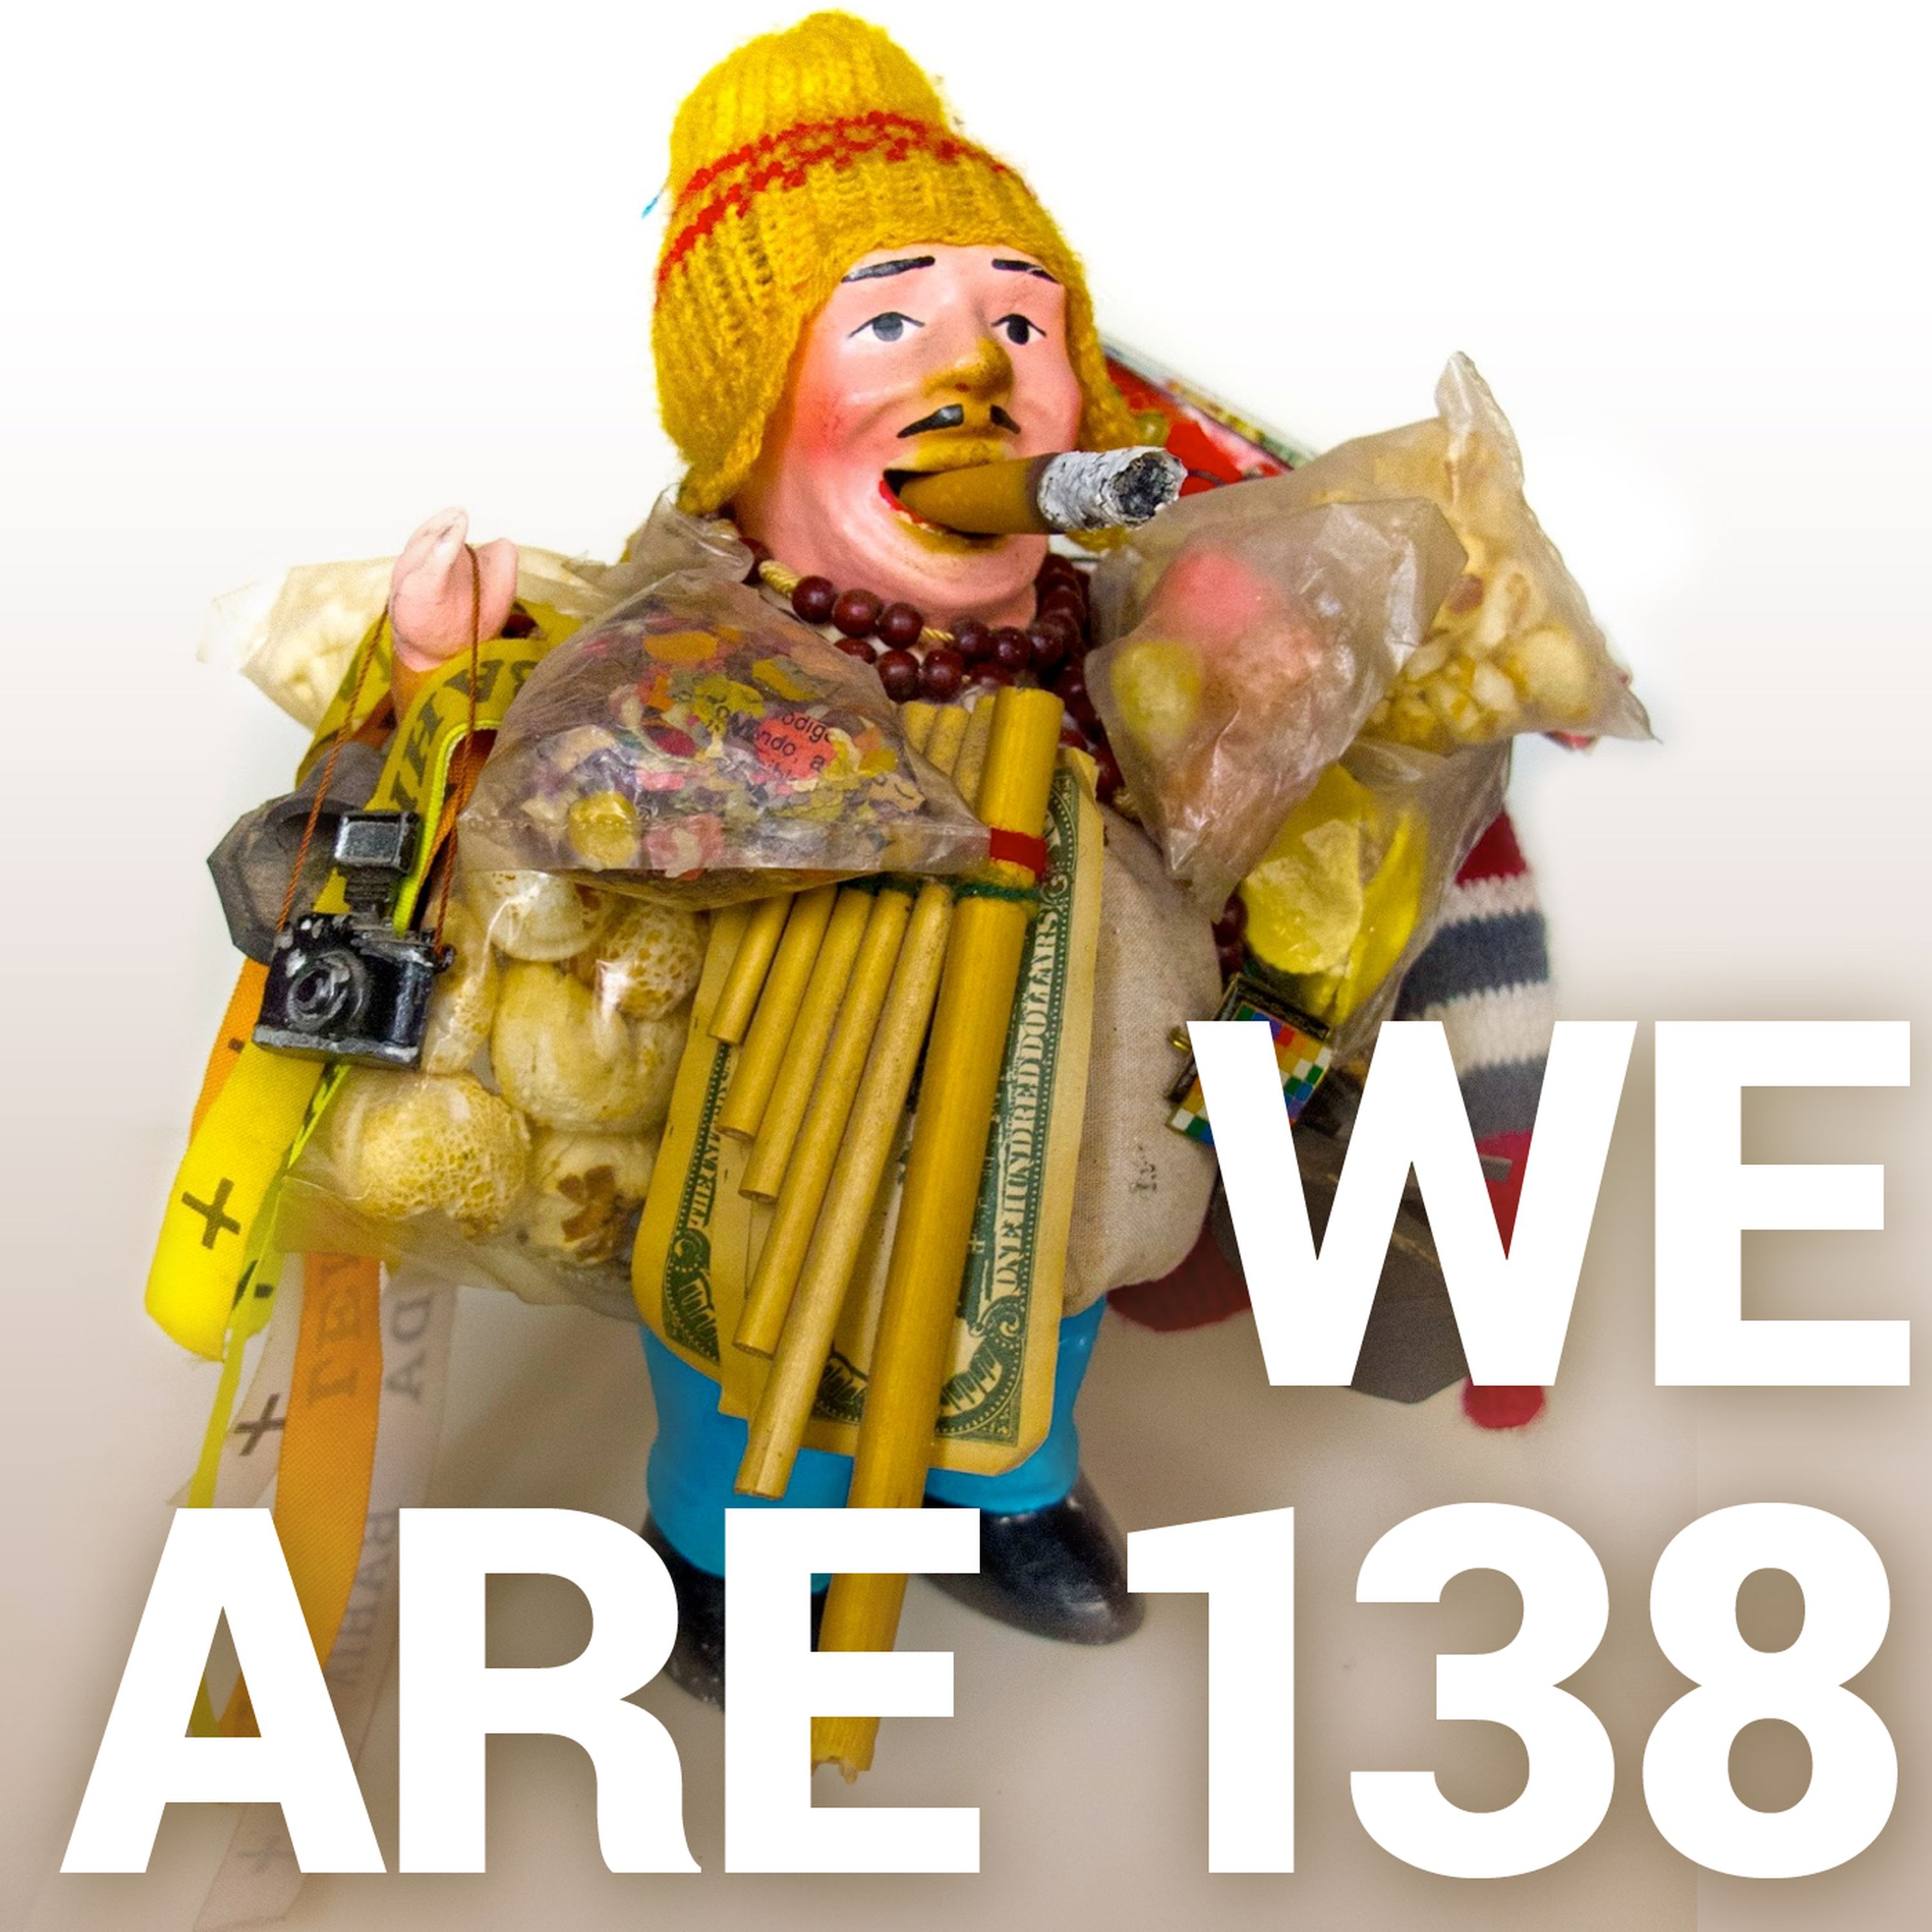 We Are 138